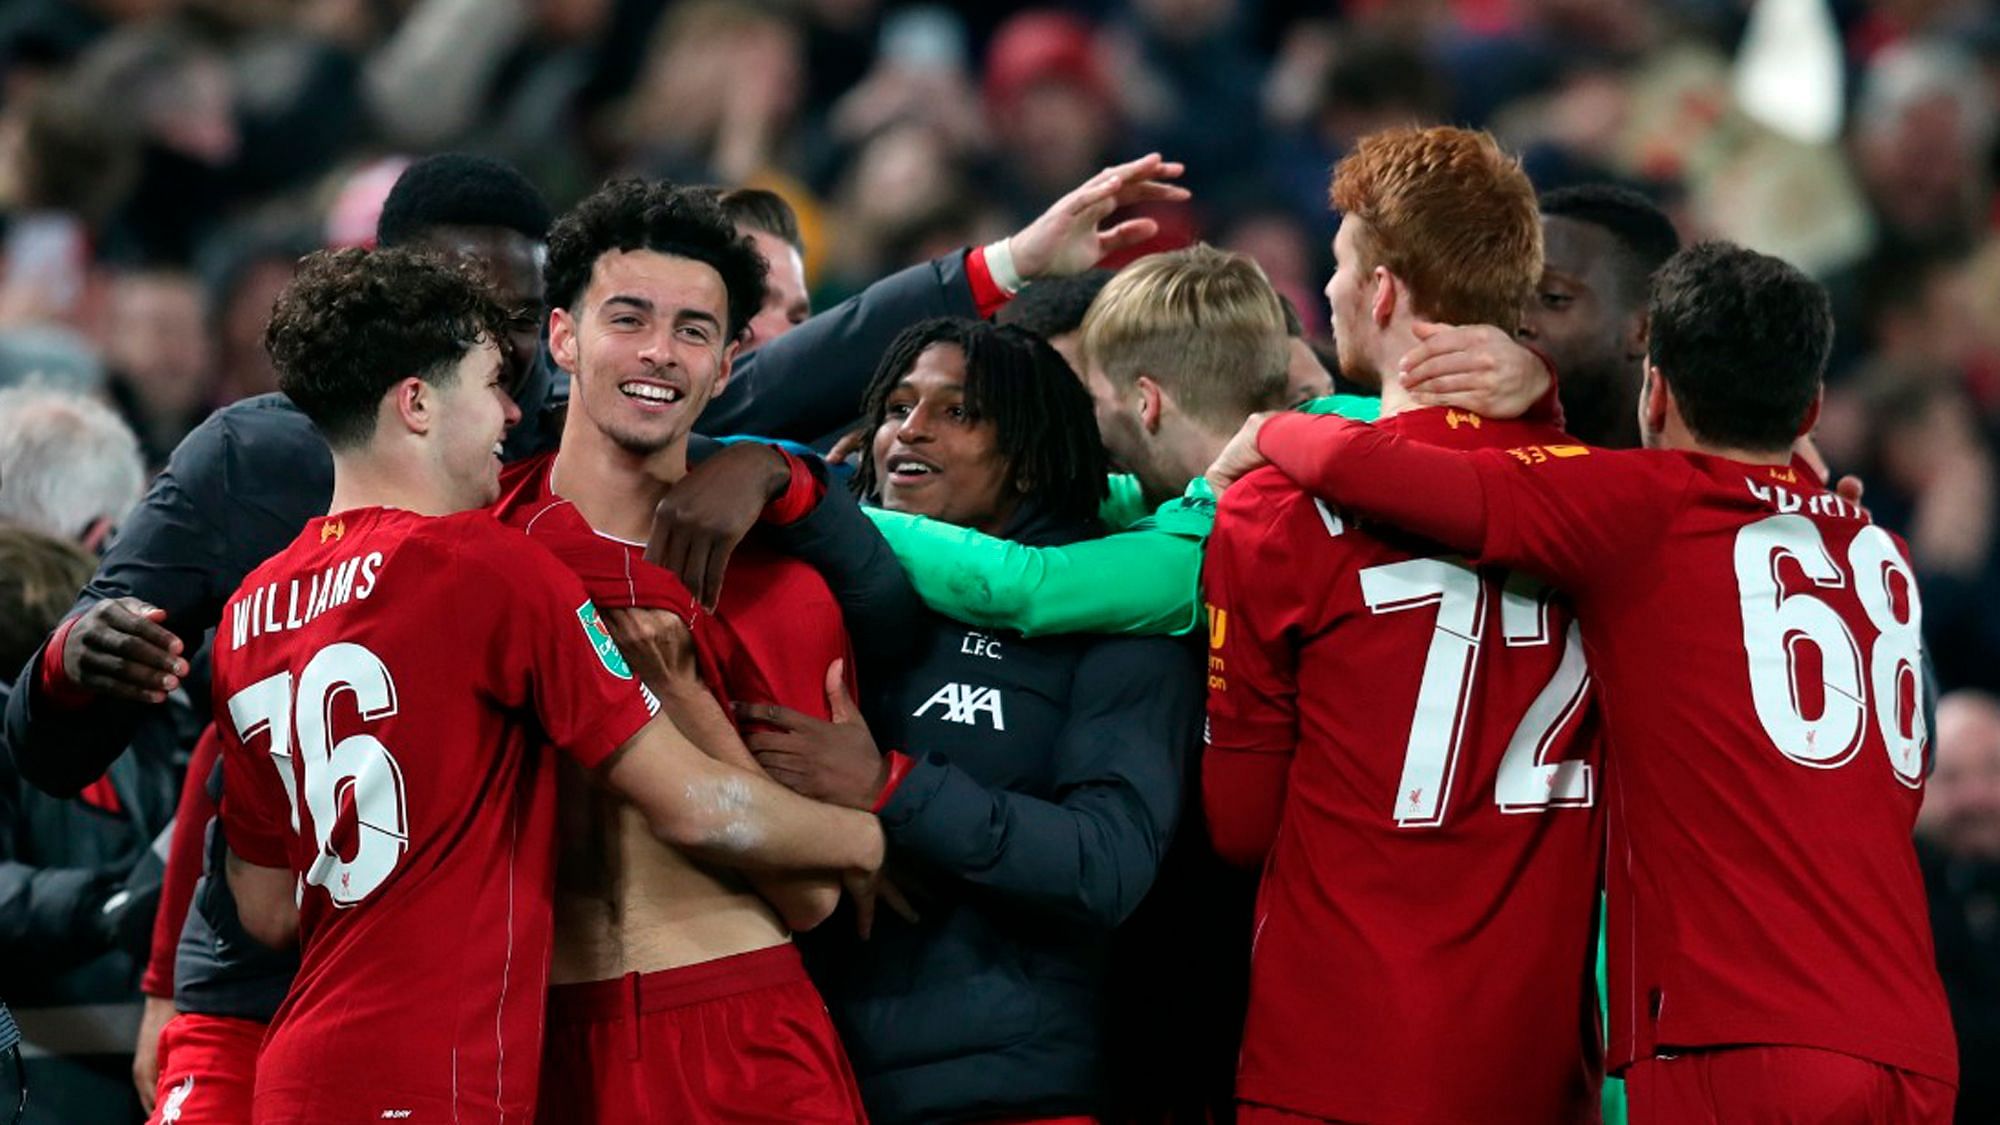 After 19 goals on a wild night at Anfield, Liverpool ousted Arsenal in the League Cup to reach the quarterfinals.